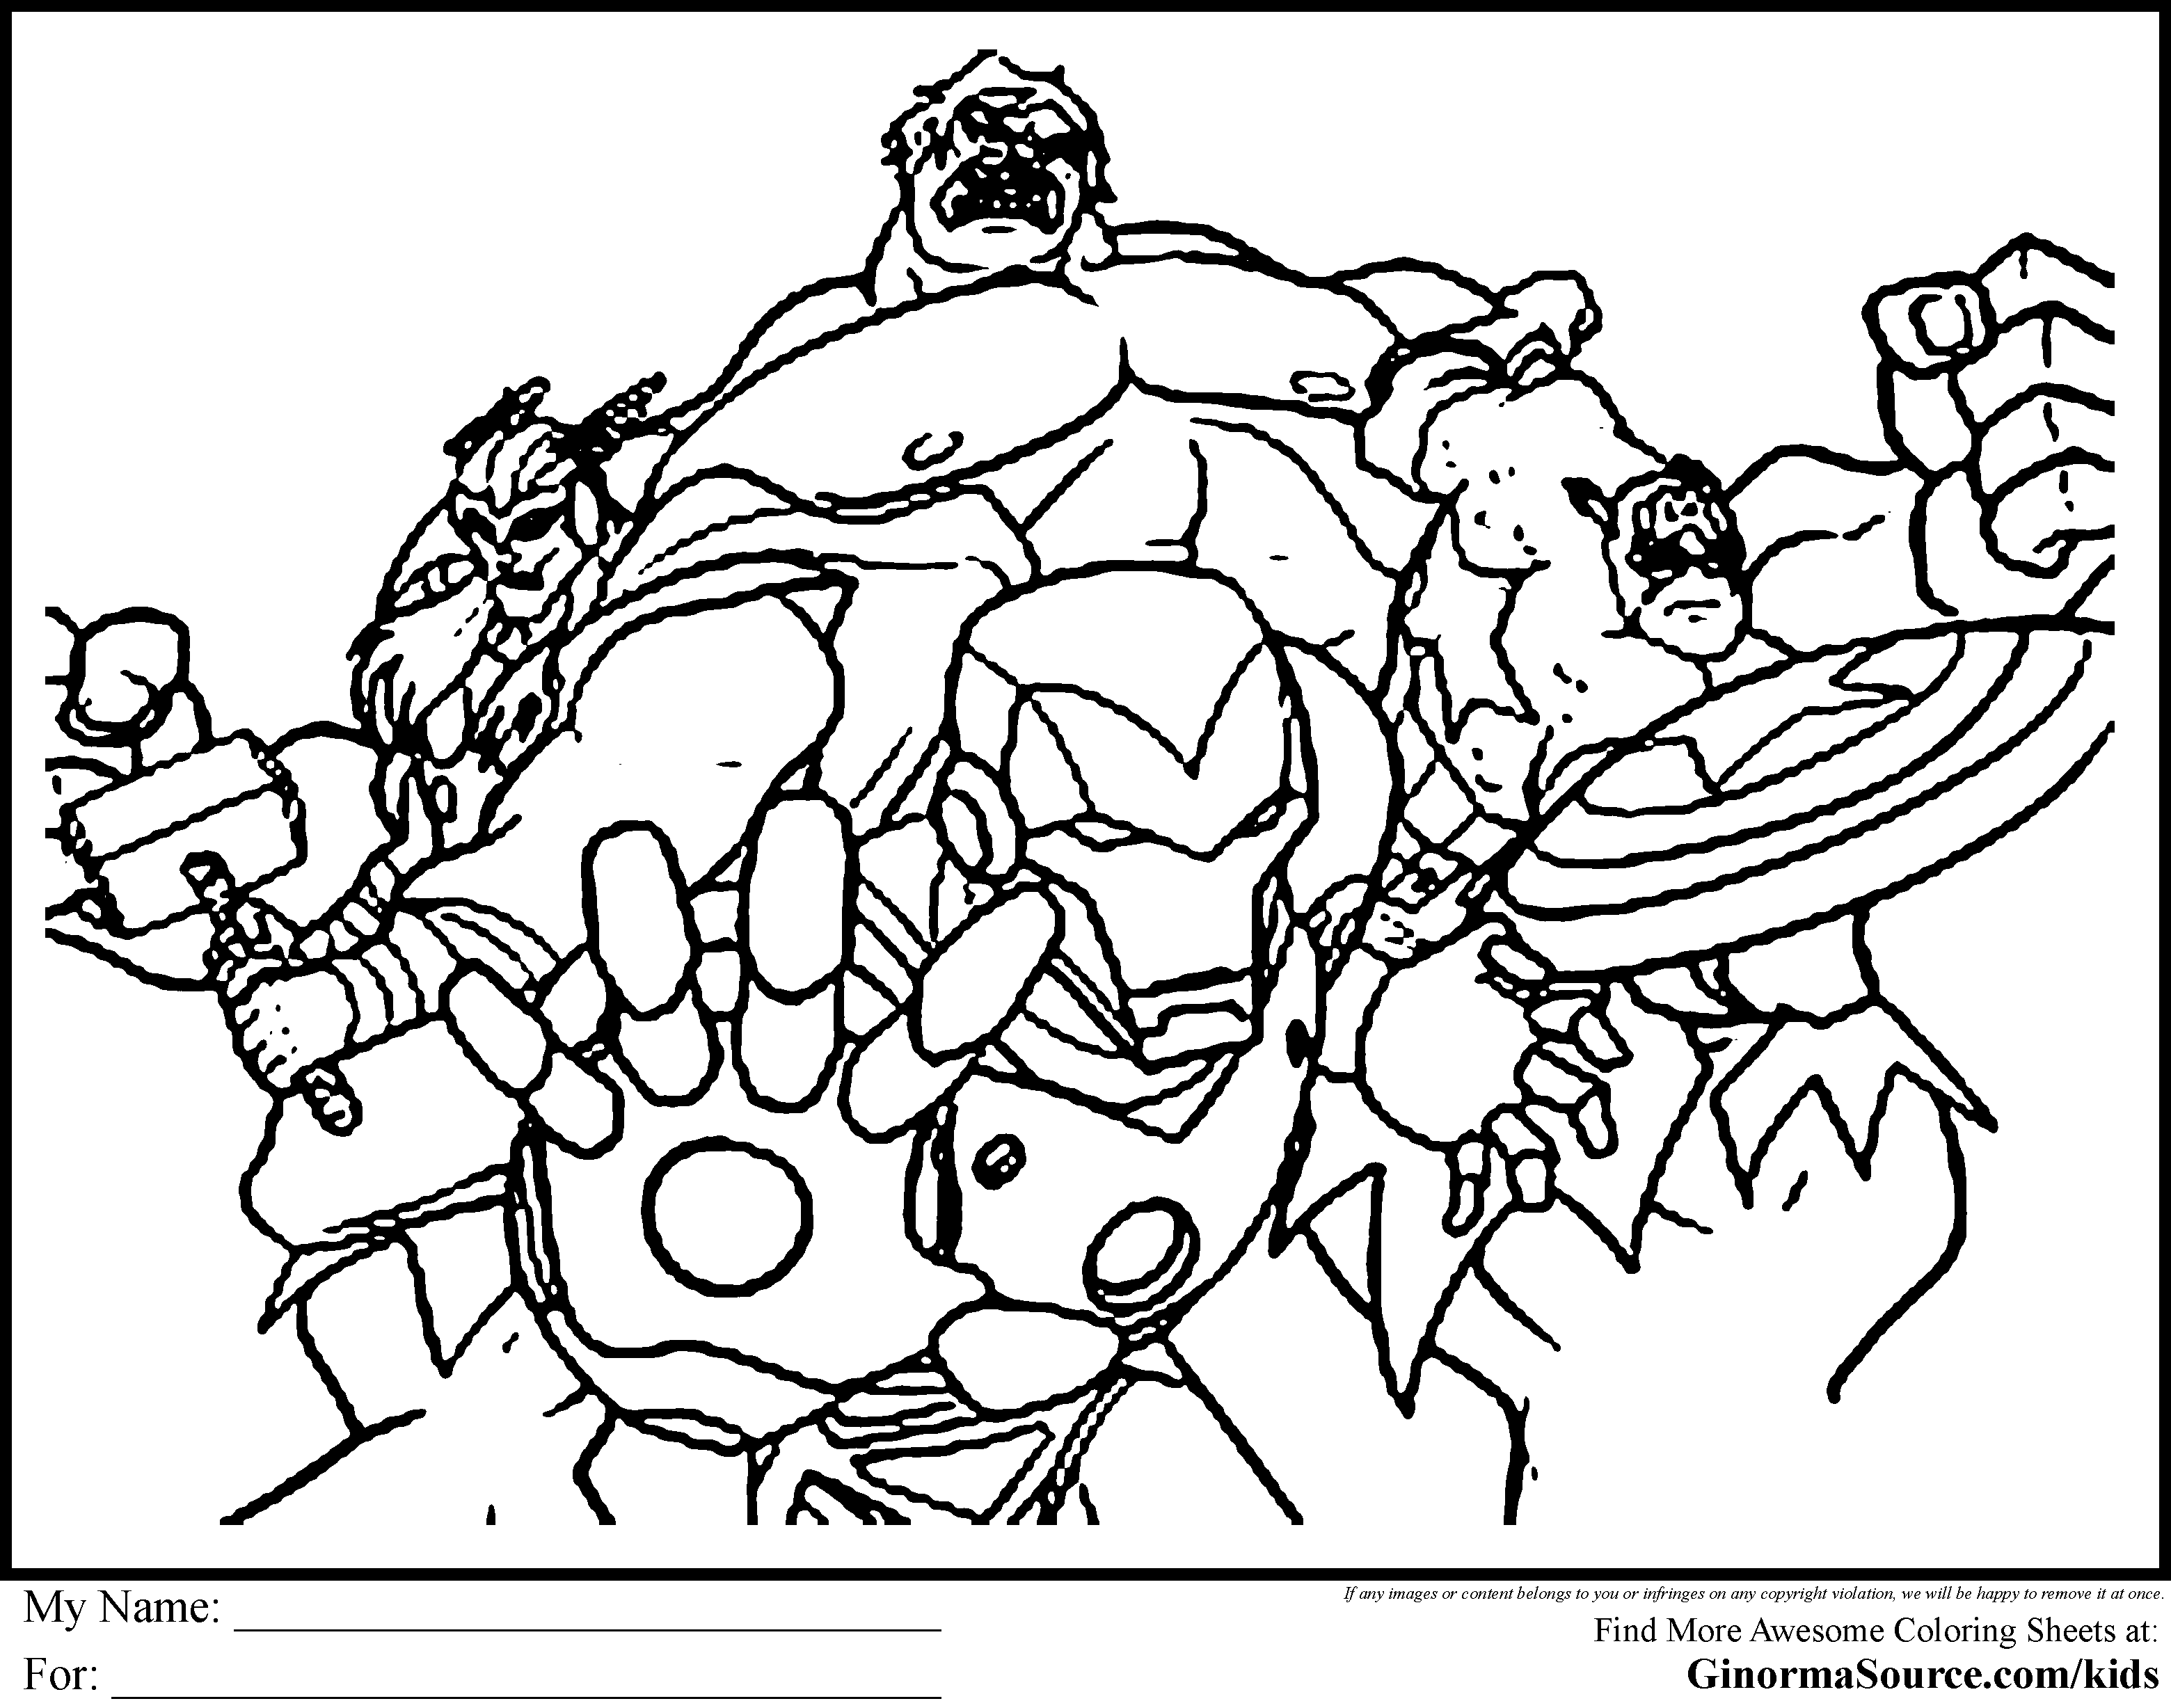 Avengers Coloring Pages Free (18 Pictures) - Colorine.net | 2420